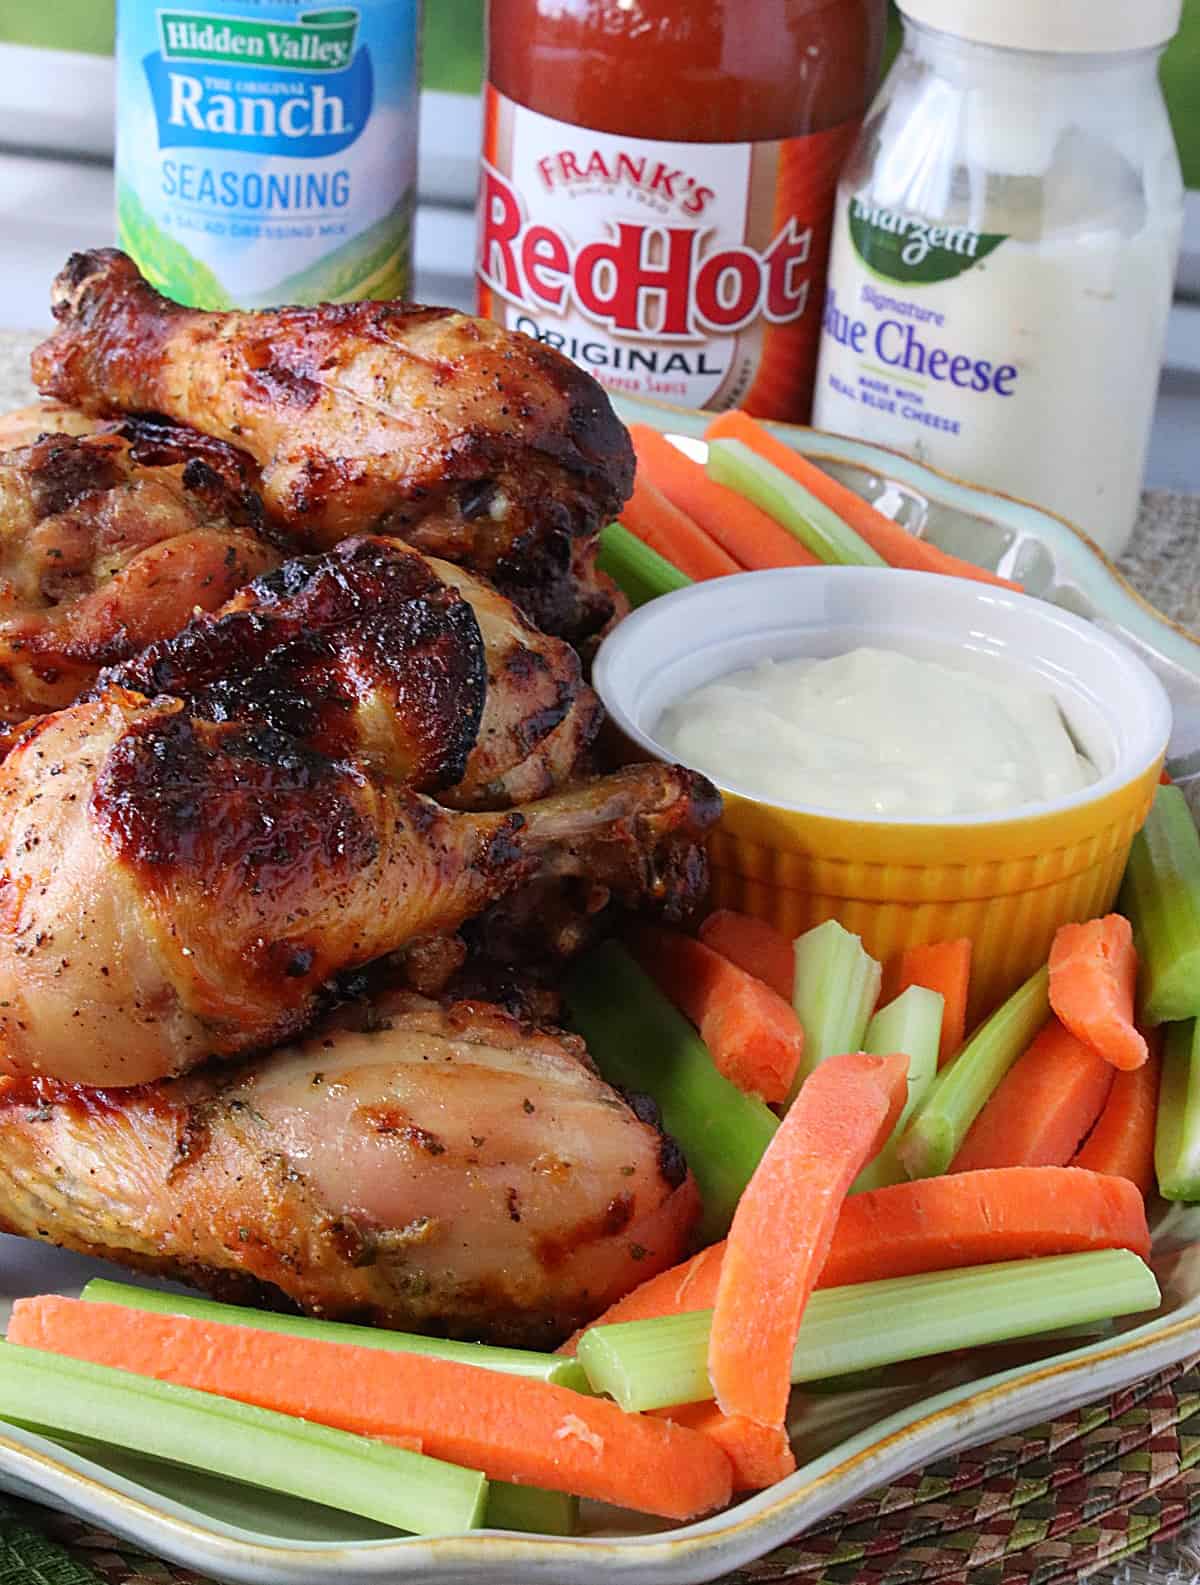 Delicious looking air fryer chicken legs surrounded by carrots and celery on a platter.